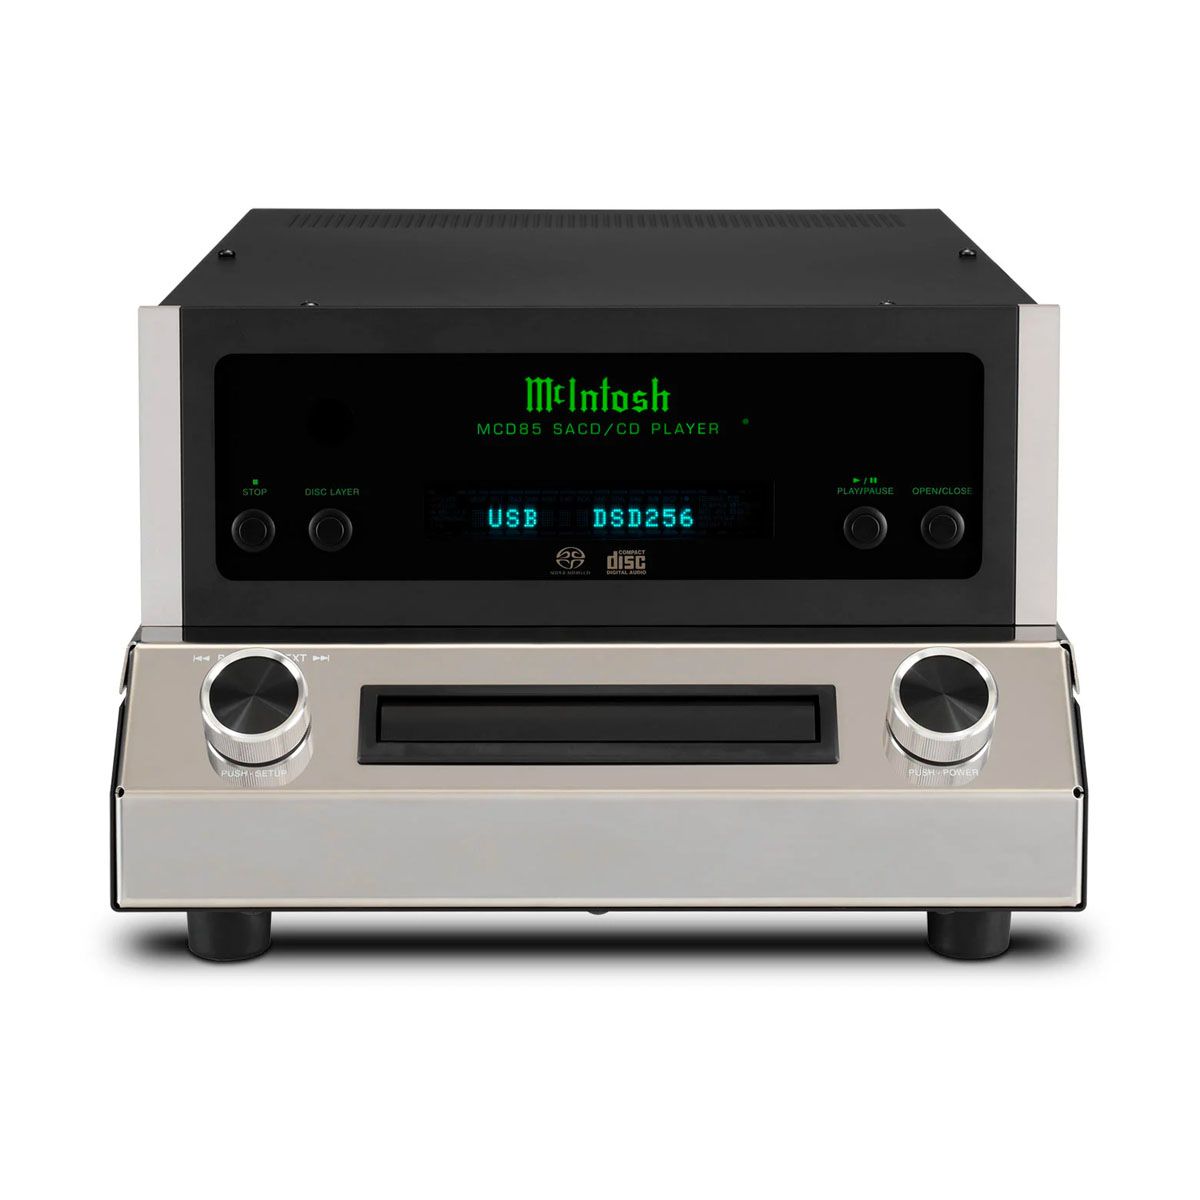 McIntosh MCD85 2-Channel SACD/CD Player front view